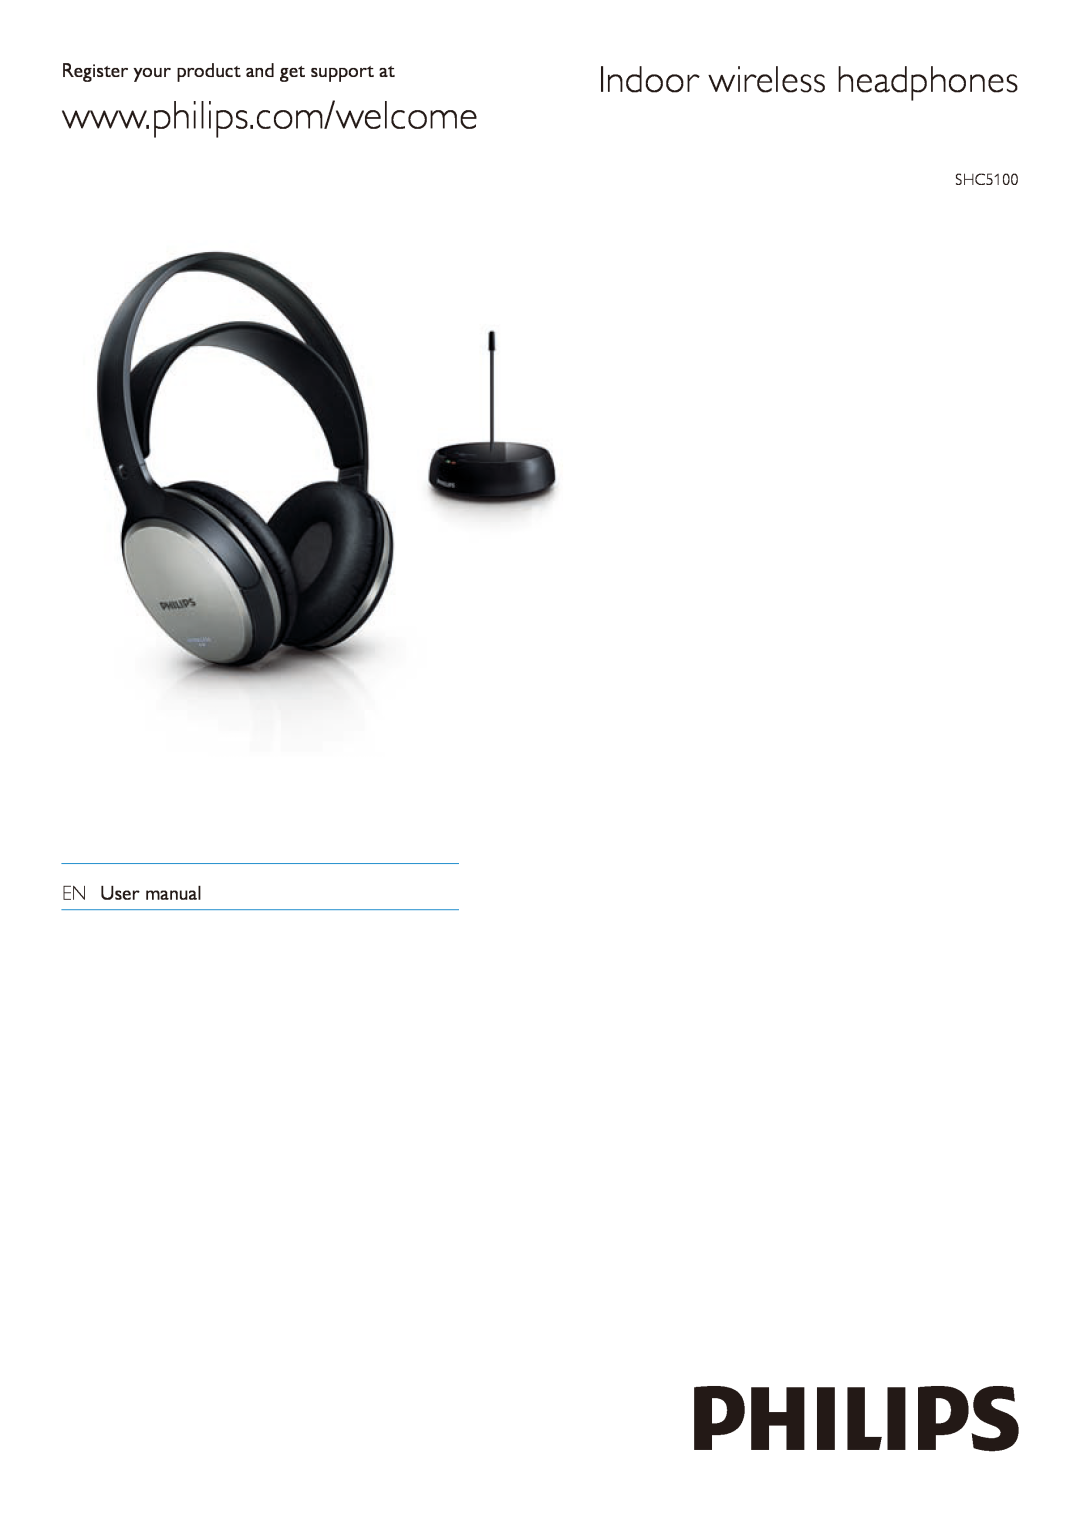 Philips SHCS100 user manual Indoor wireless headphones, Register your product and get support at 